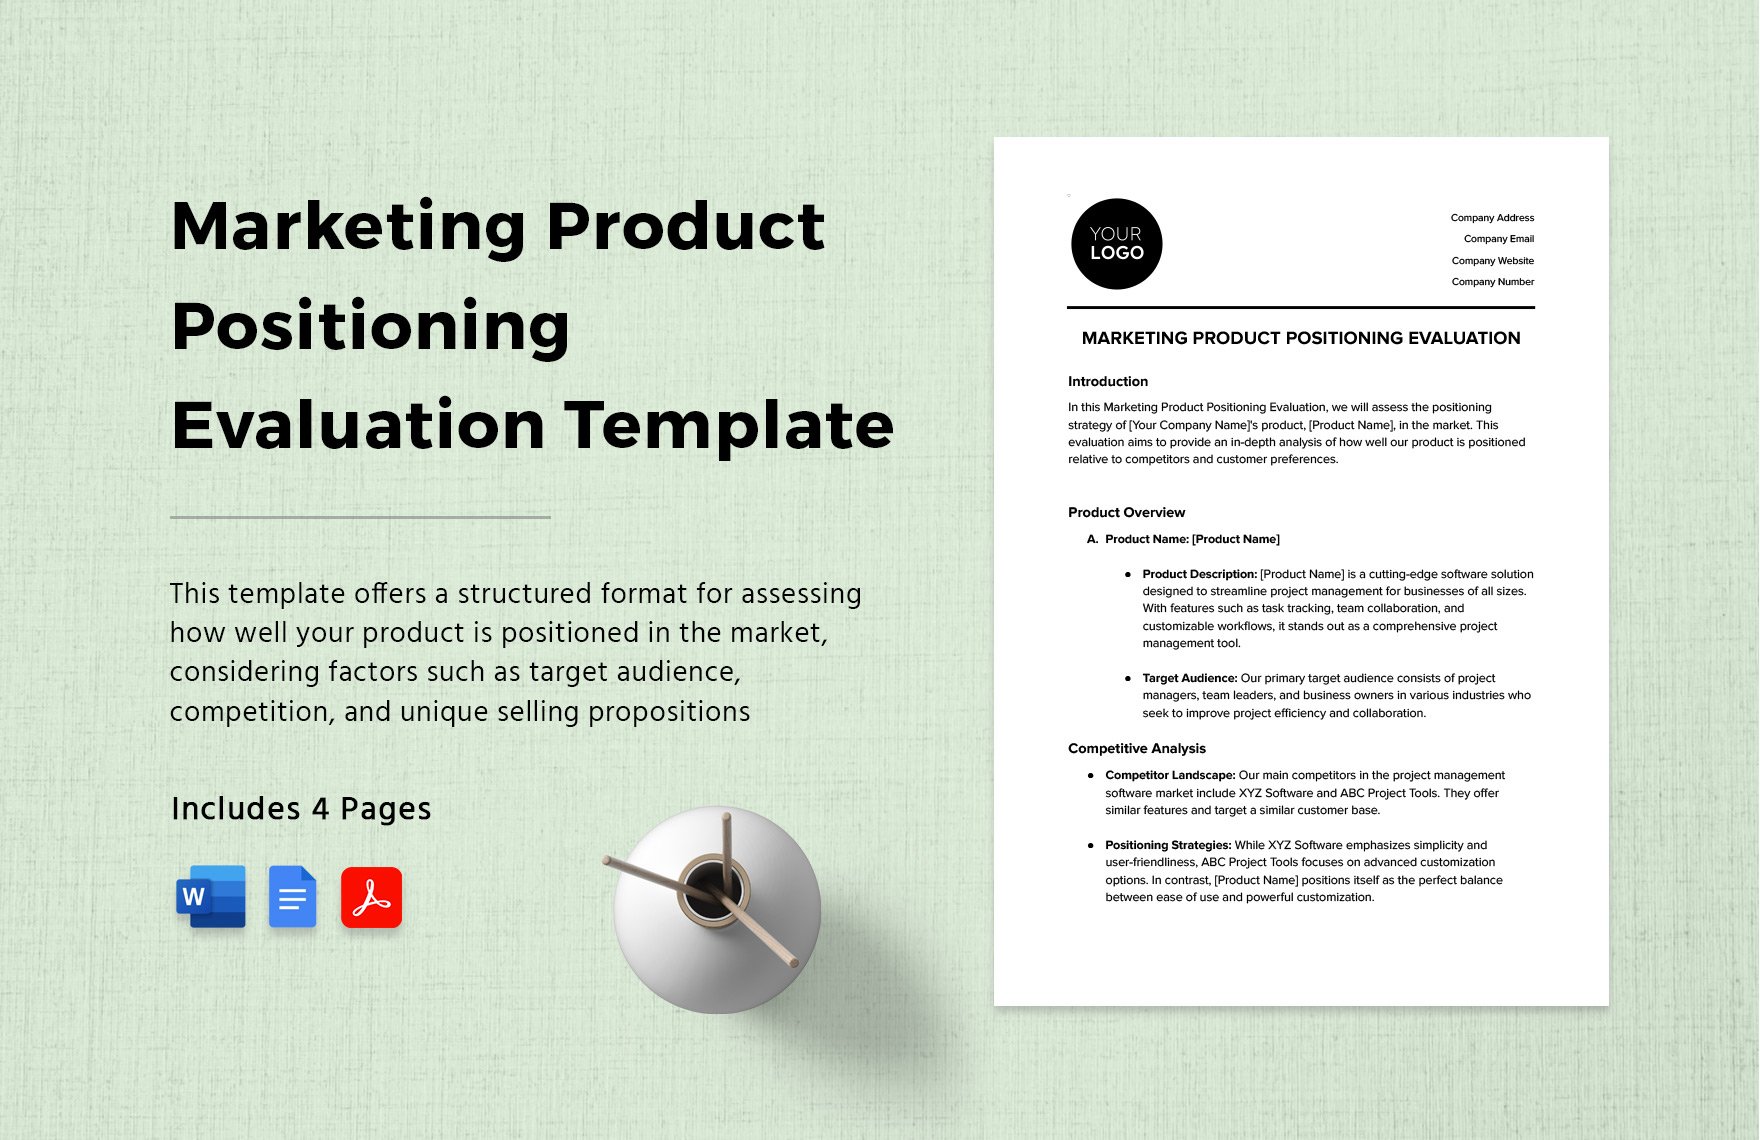 Marketing Product Positioning Evaluation Template in Word, Google Docs, PDF